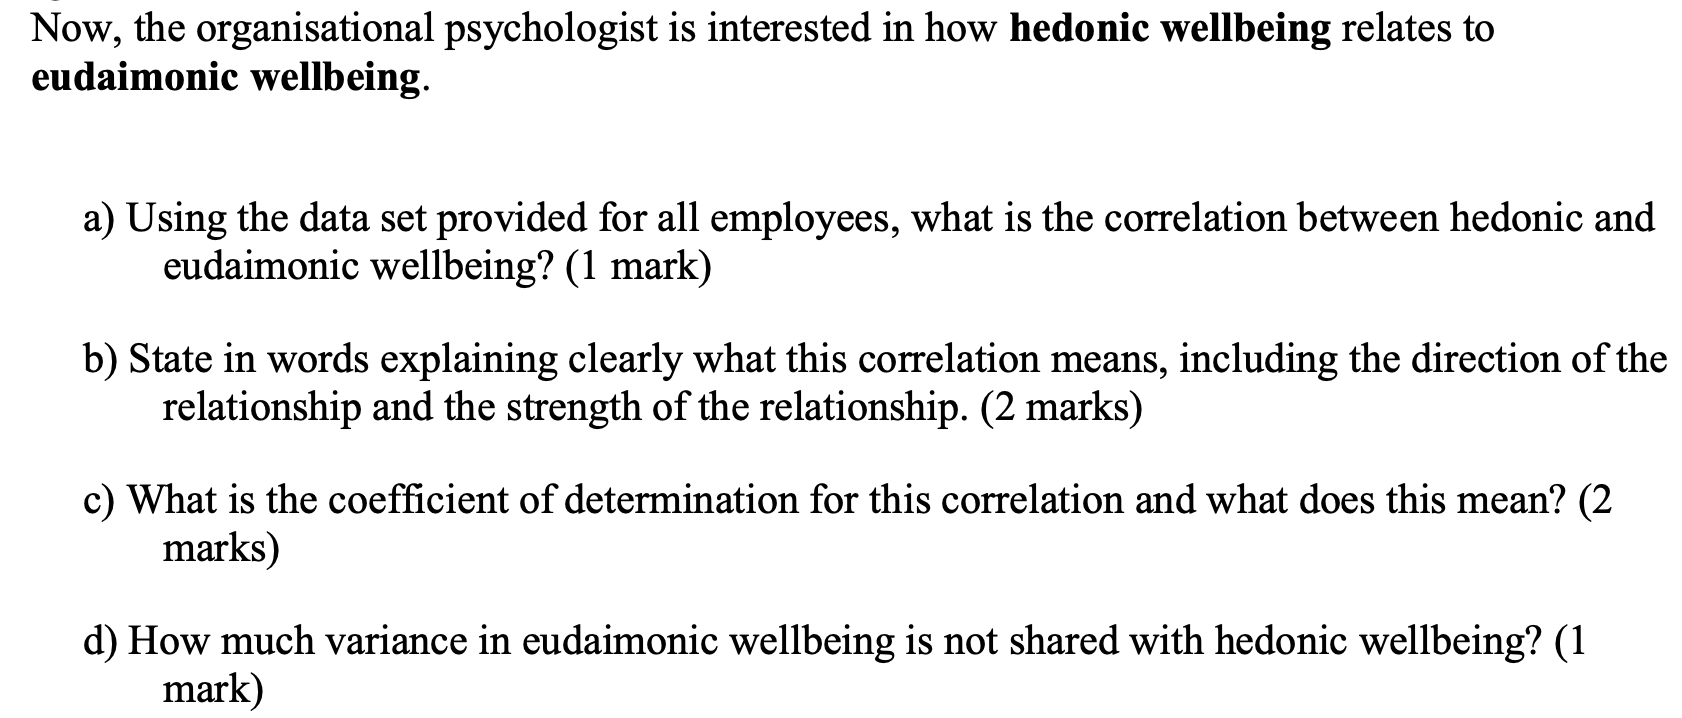 Correlations Hedonic Wellbeing Total Score Eudaimonic Wellbeing Total Score 526 Hedonic Wellbeing Total Score 1 Pearson 2